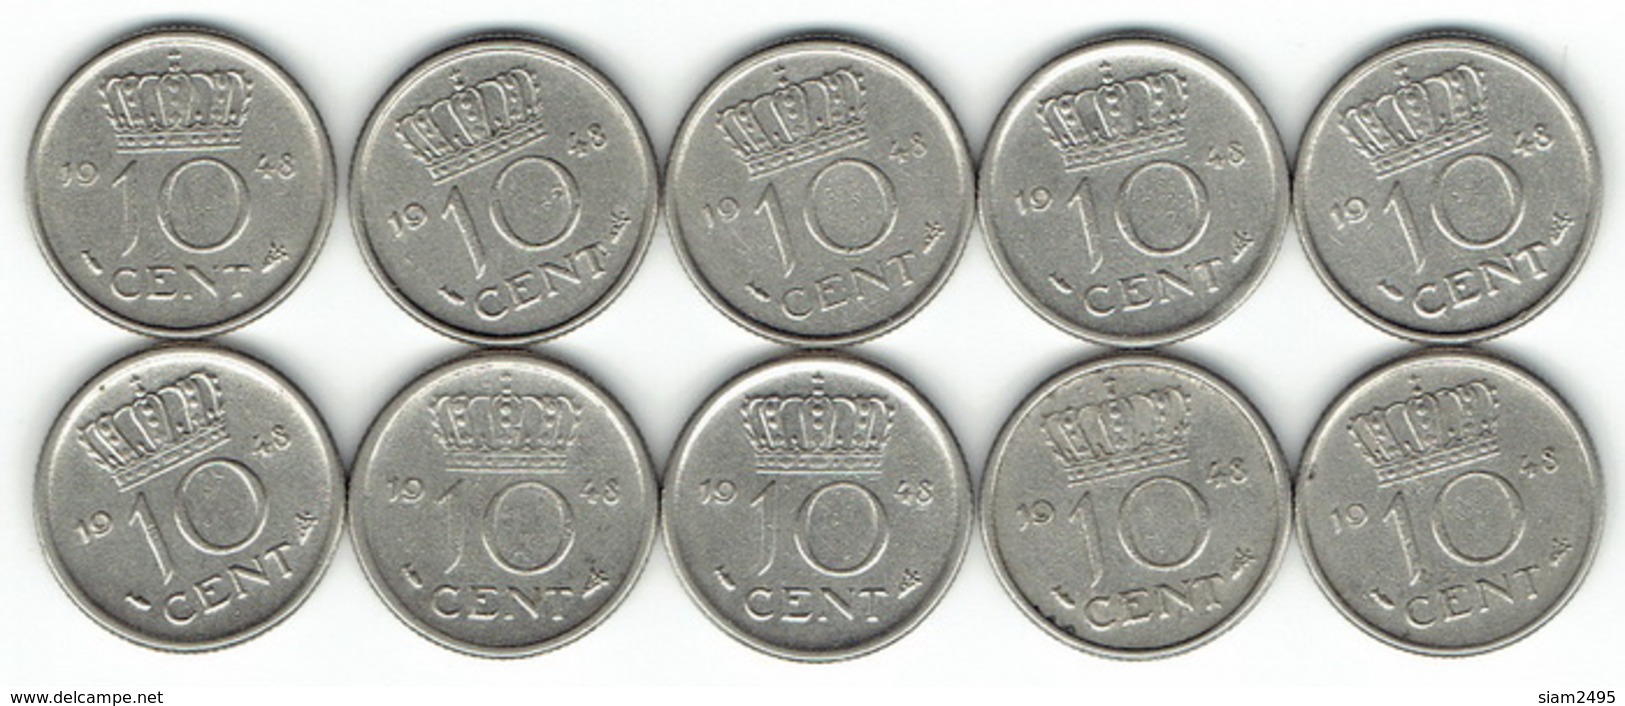 The Netherlands 1948, 10 Cents - 10 Cent